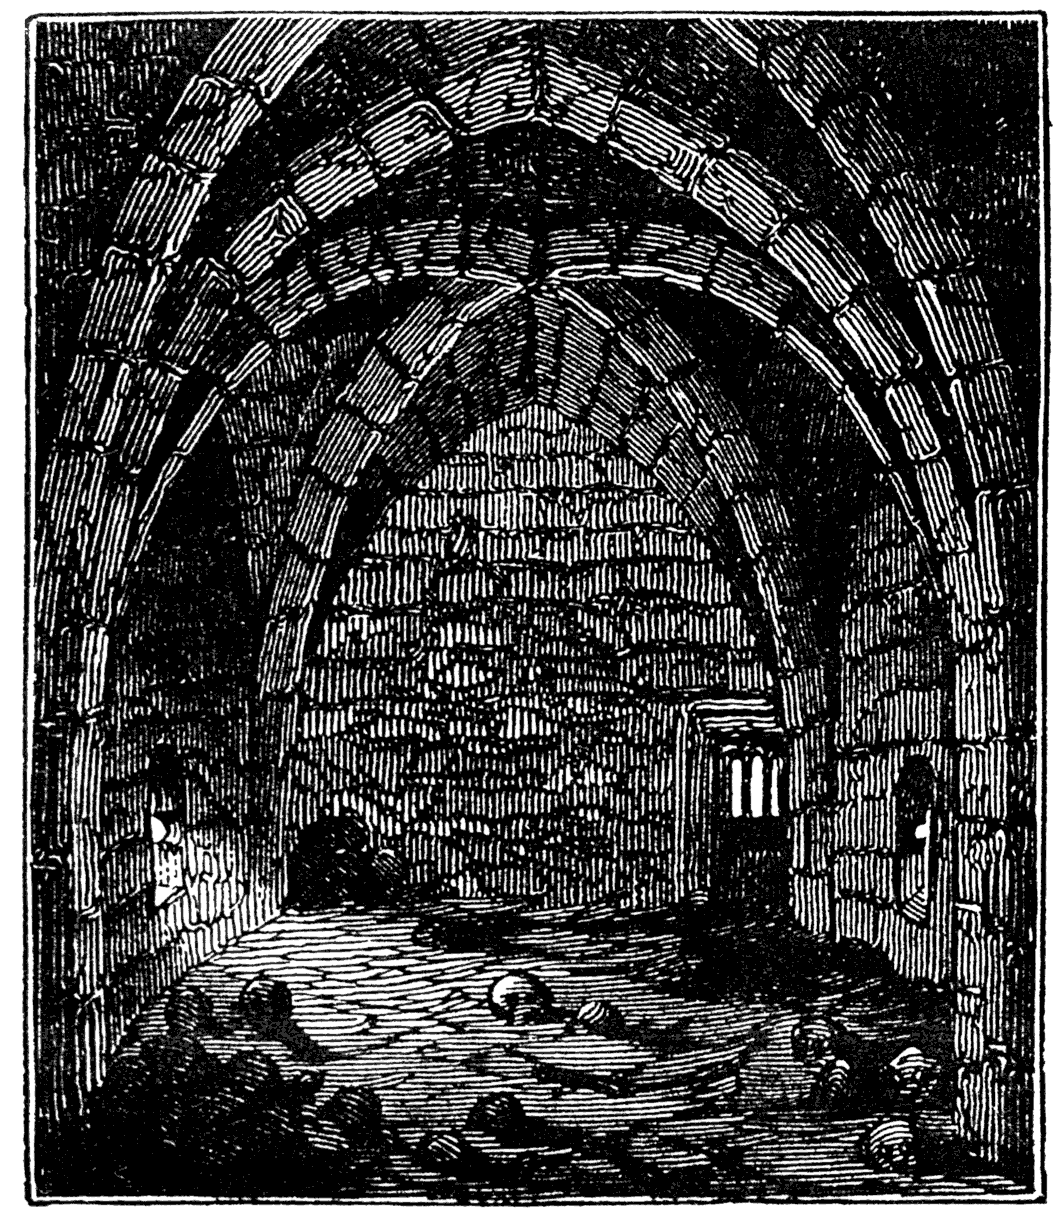 Interior of Charnel House, Stratford upon Avon. From James Halliwell 'The Life of William Shakespeare', 1848, page 287. Original published size 5.7cm wide by 6.7cm high.